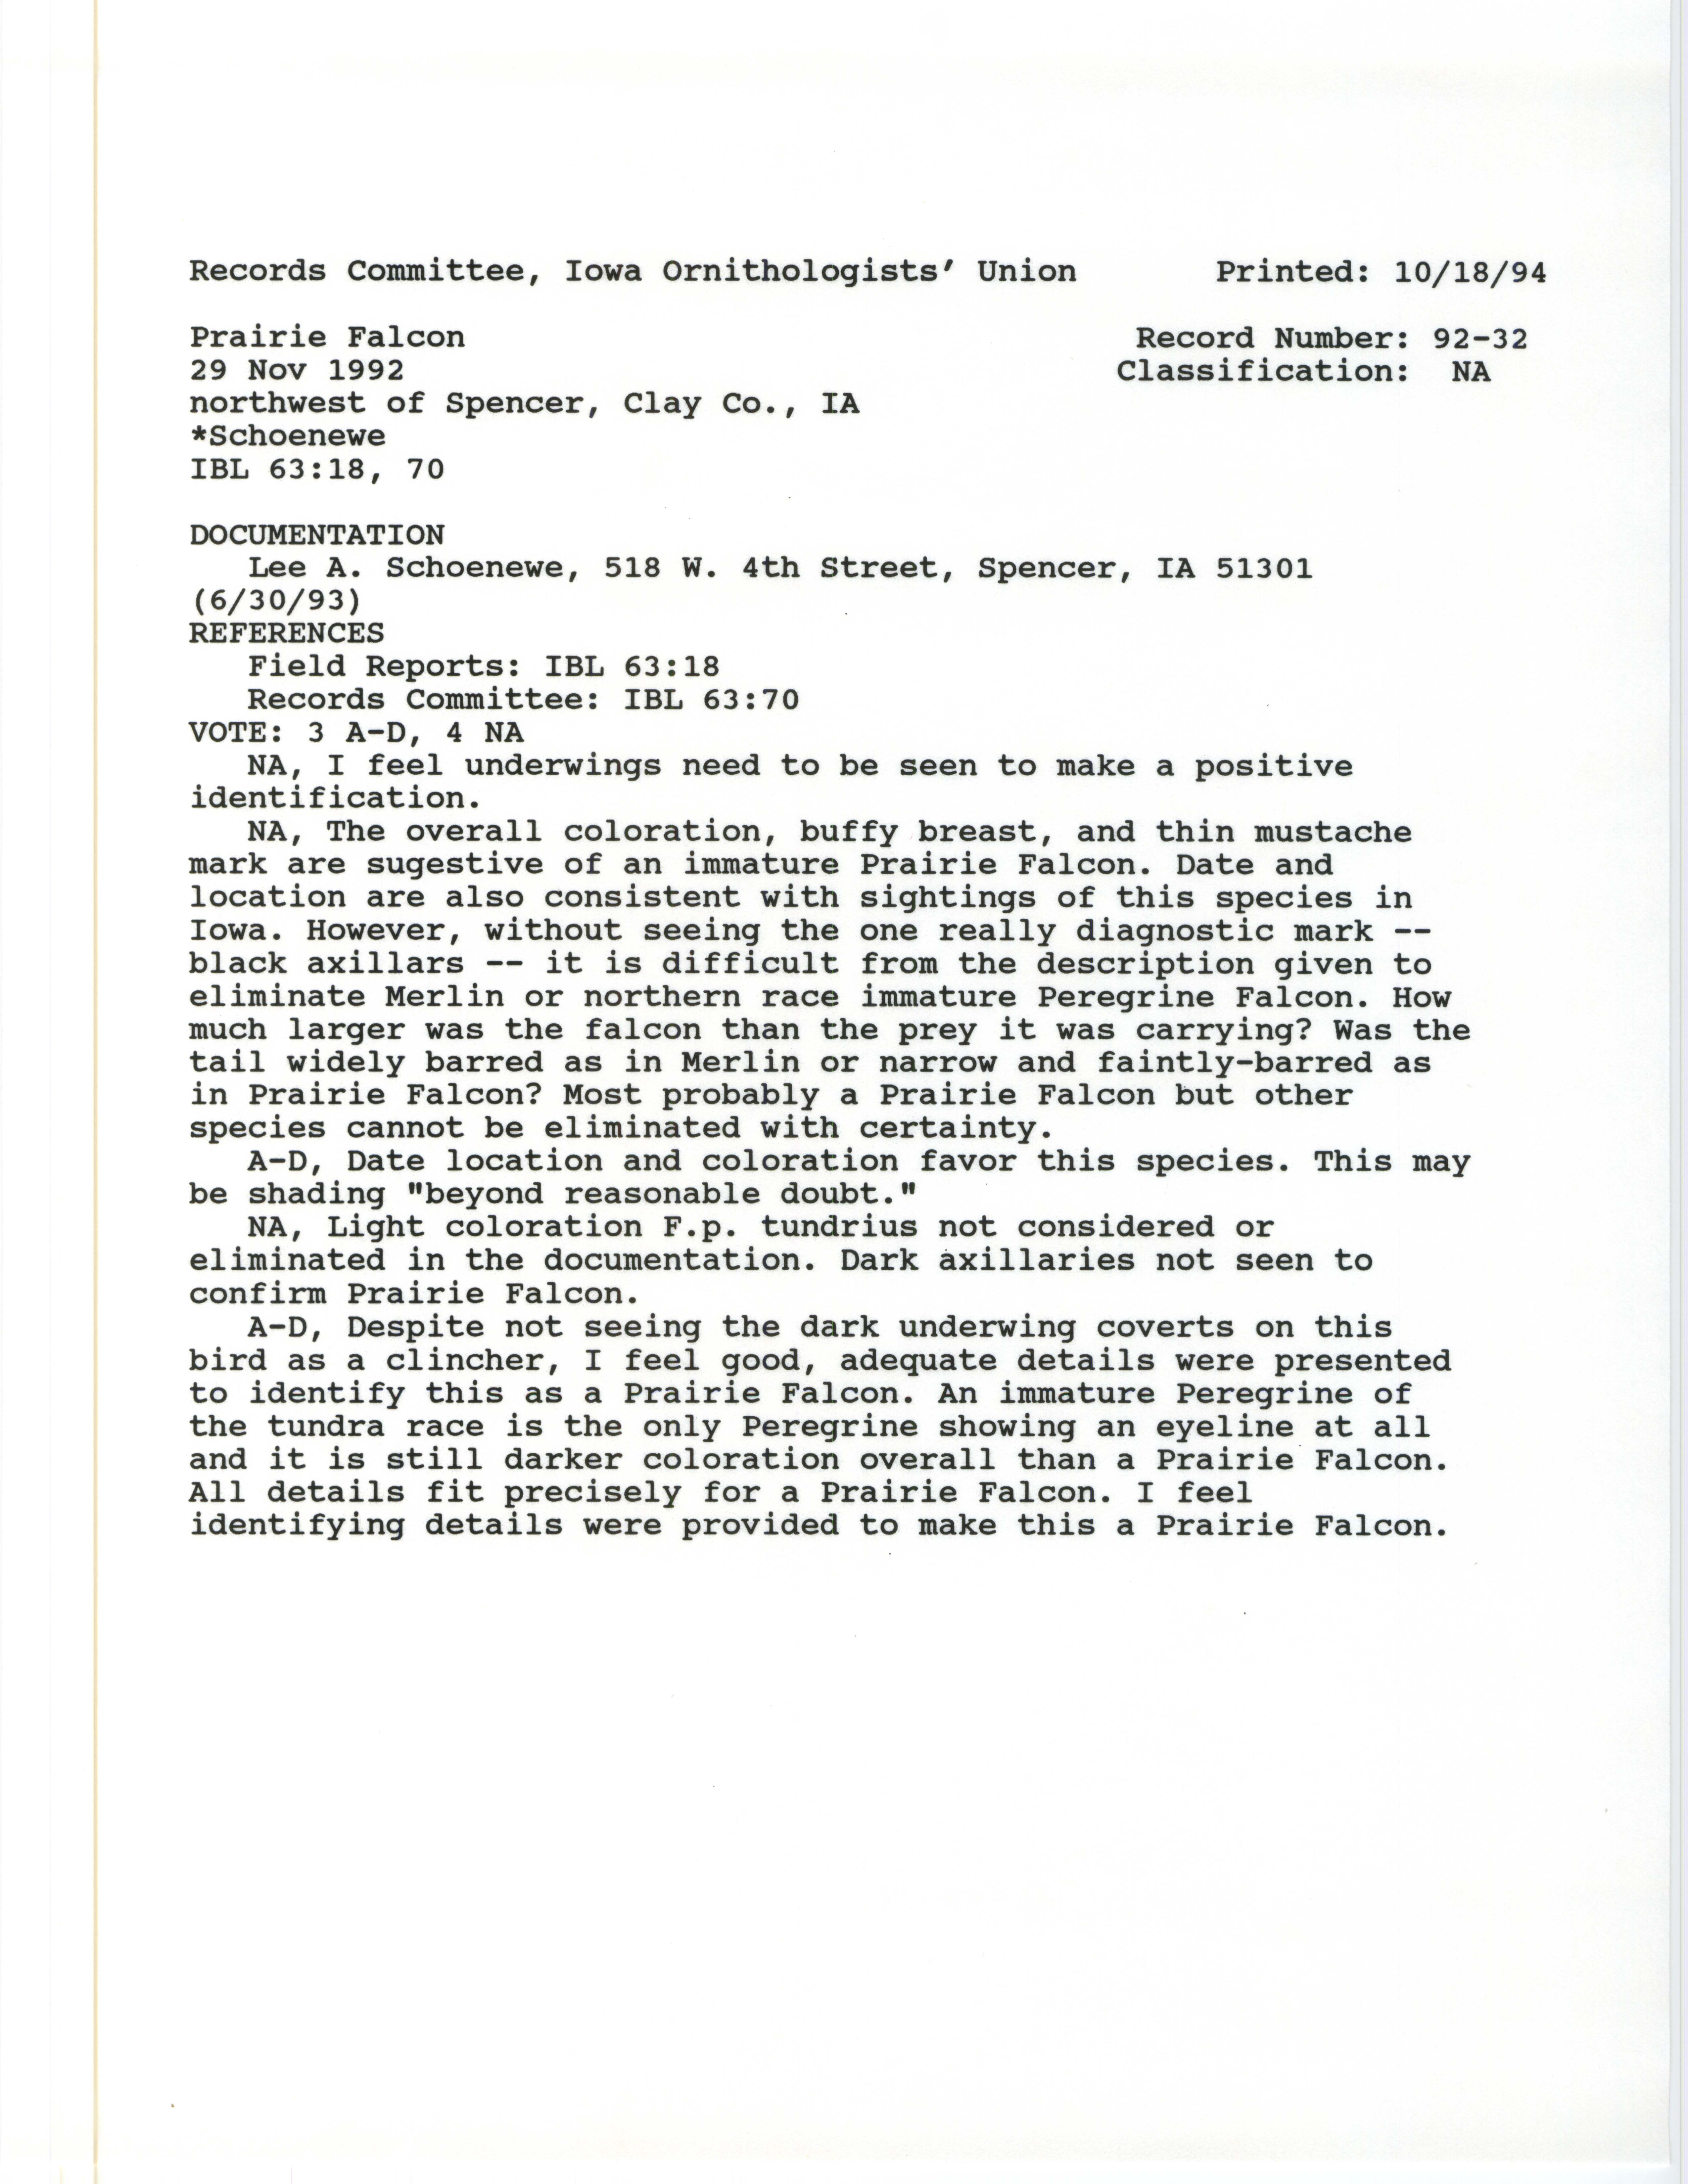 Records Committee review for rare bird sighting of Prairie Falcon northwest of Spencer, 1992